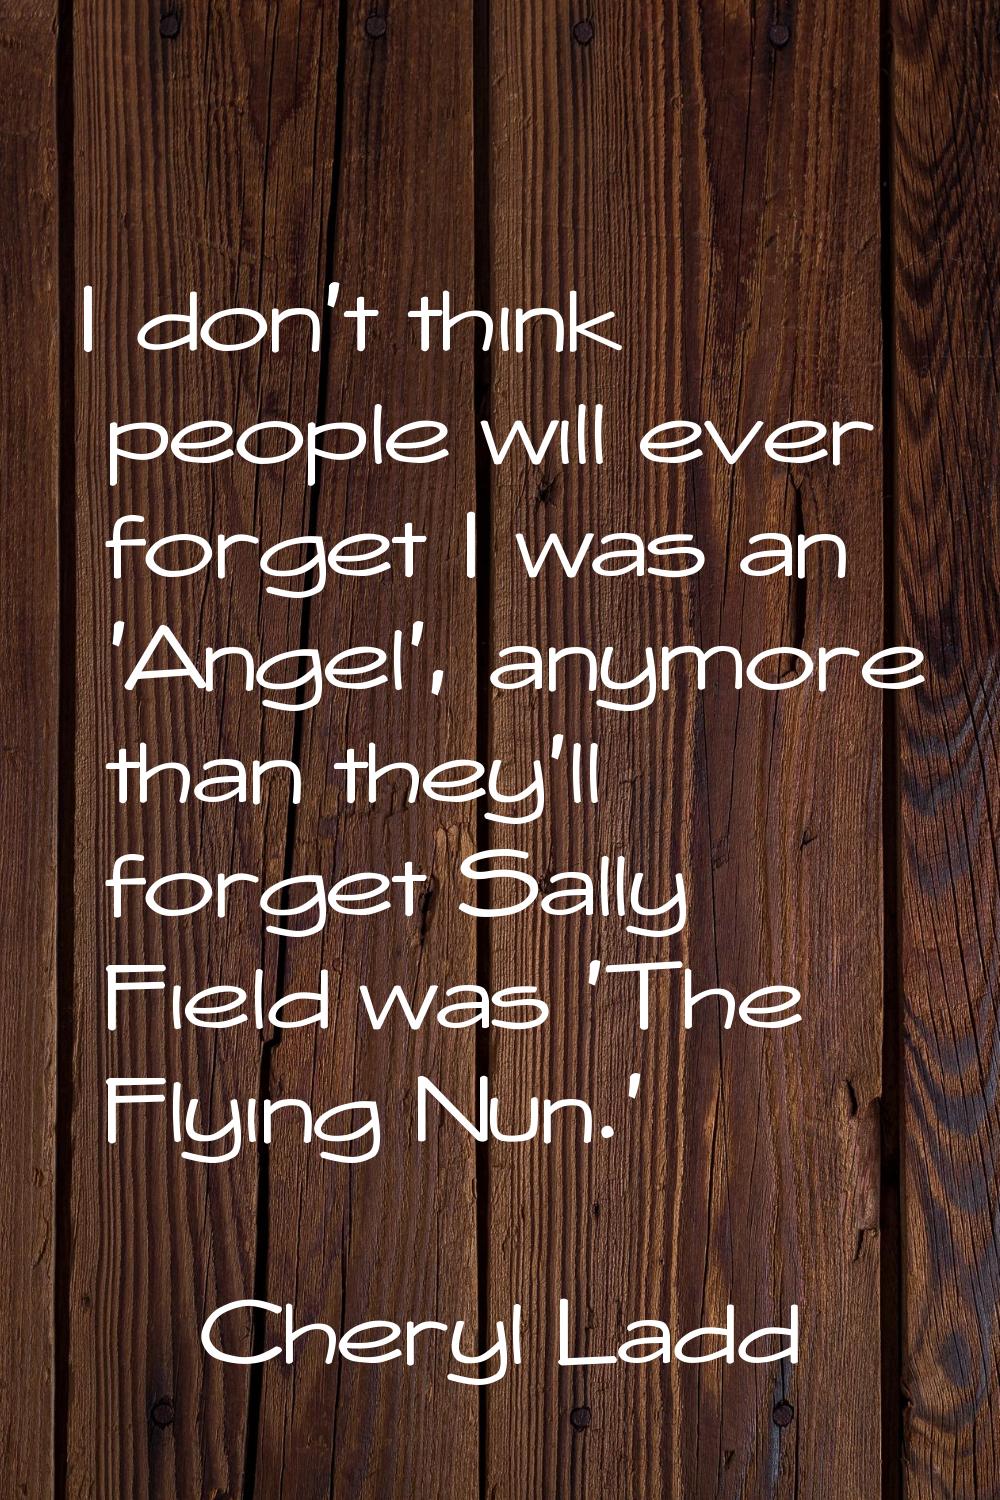 I don't think people will ever forget I was an 'Angel', anymore than they'll forget Sally Field was